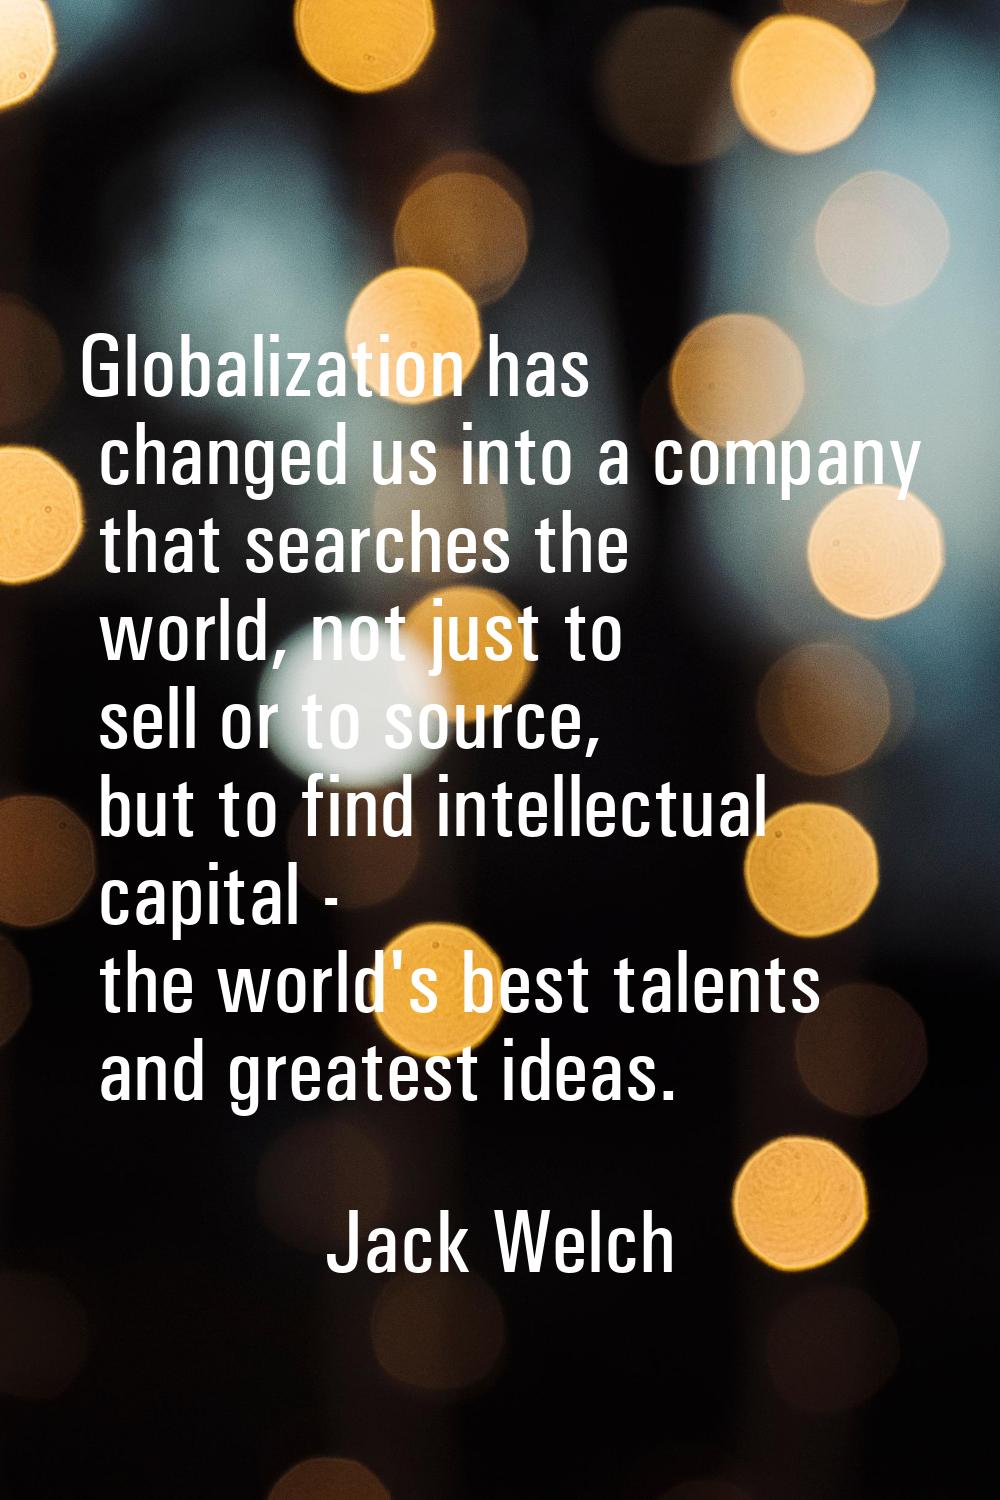 Globalization has changed us into a company that searches the world, not just to sell or to source,